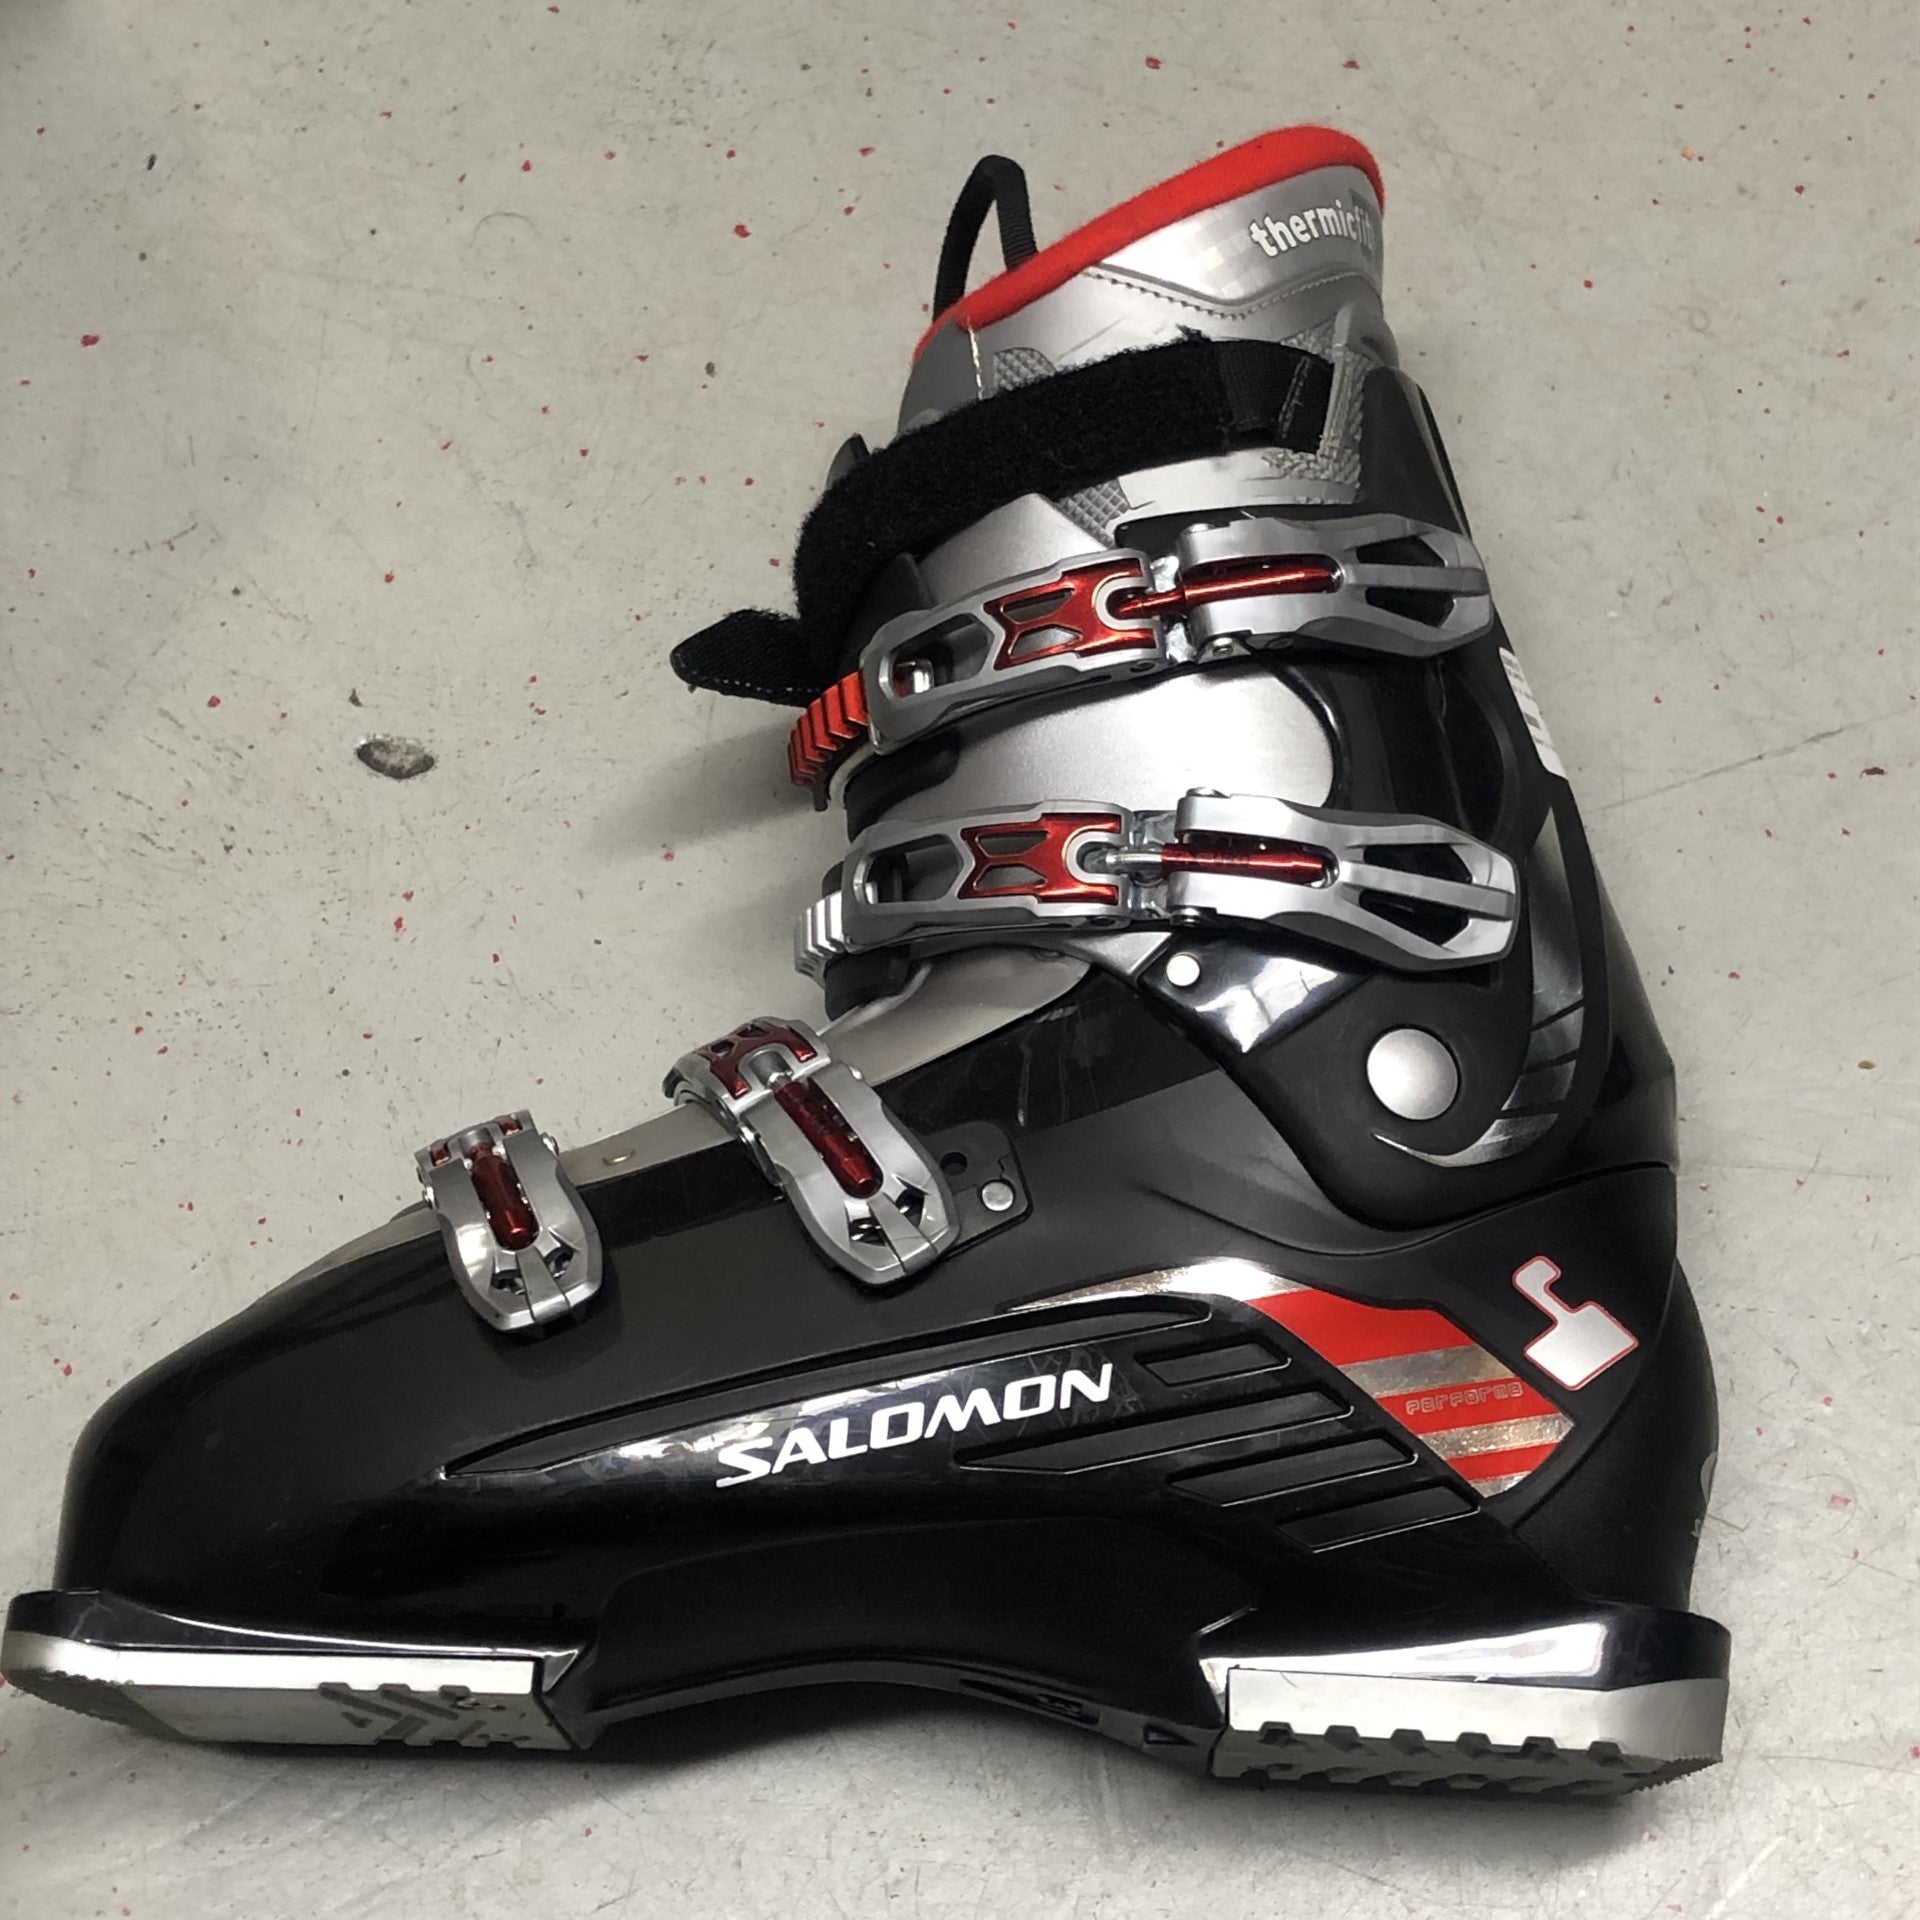 Salomon Thermafit Ski Boots Sz 31.5 Blk/Red/Gry-Sports Replay - Sports Excellence-Sports Replay - Sports Excellence